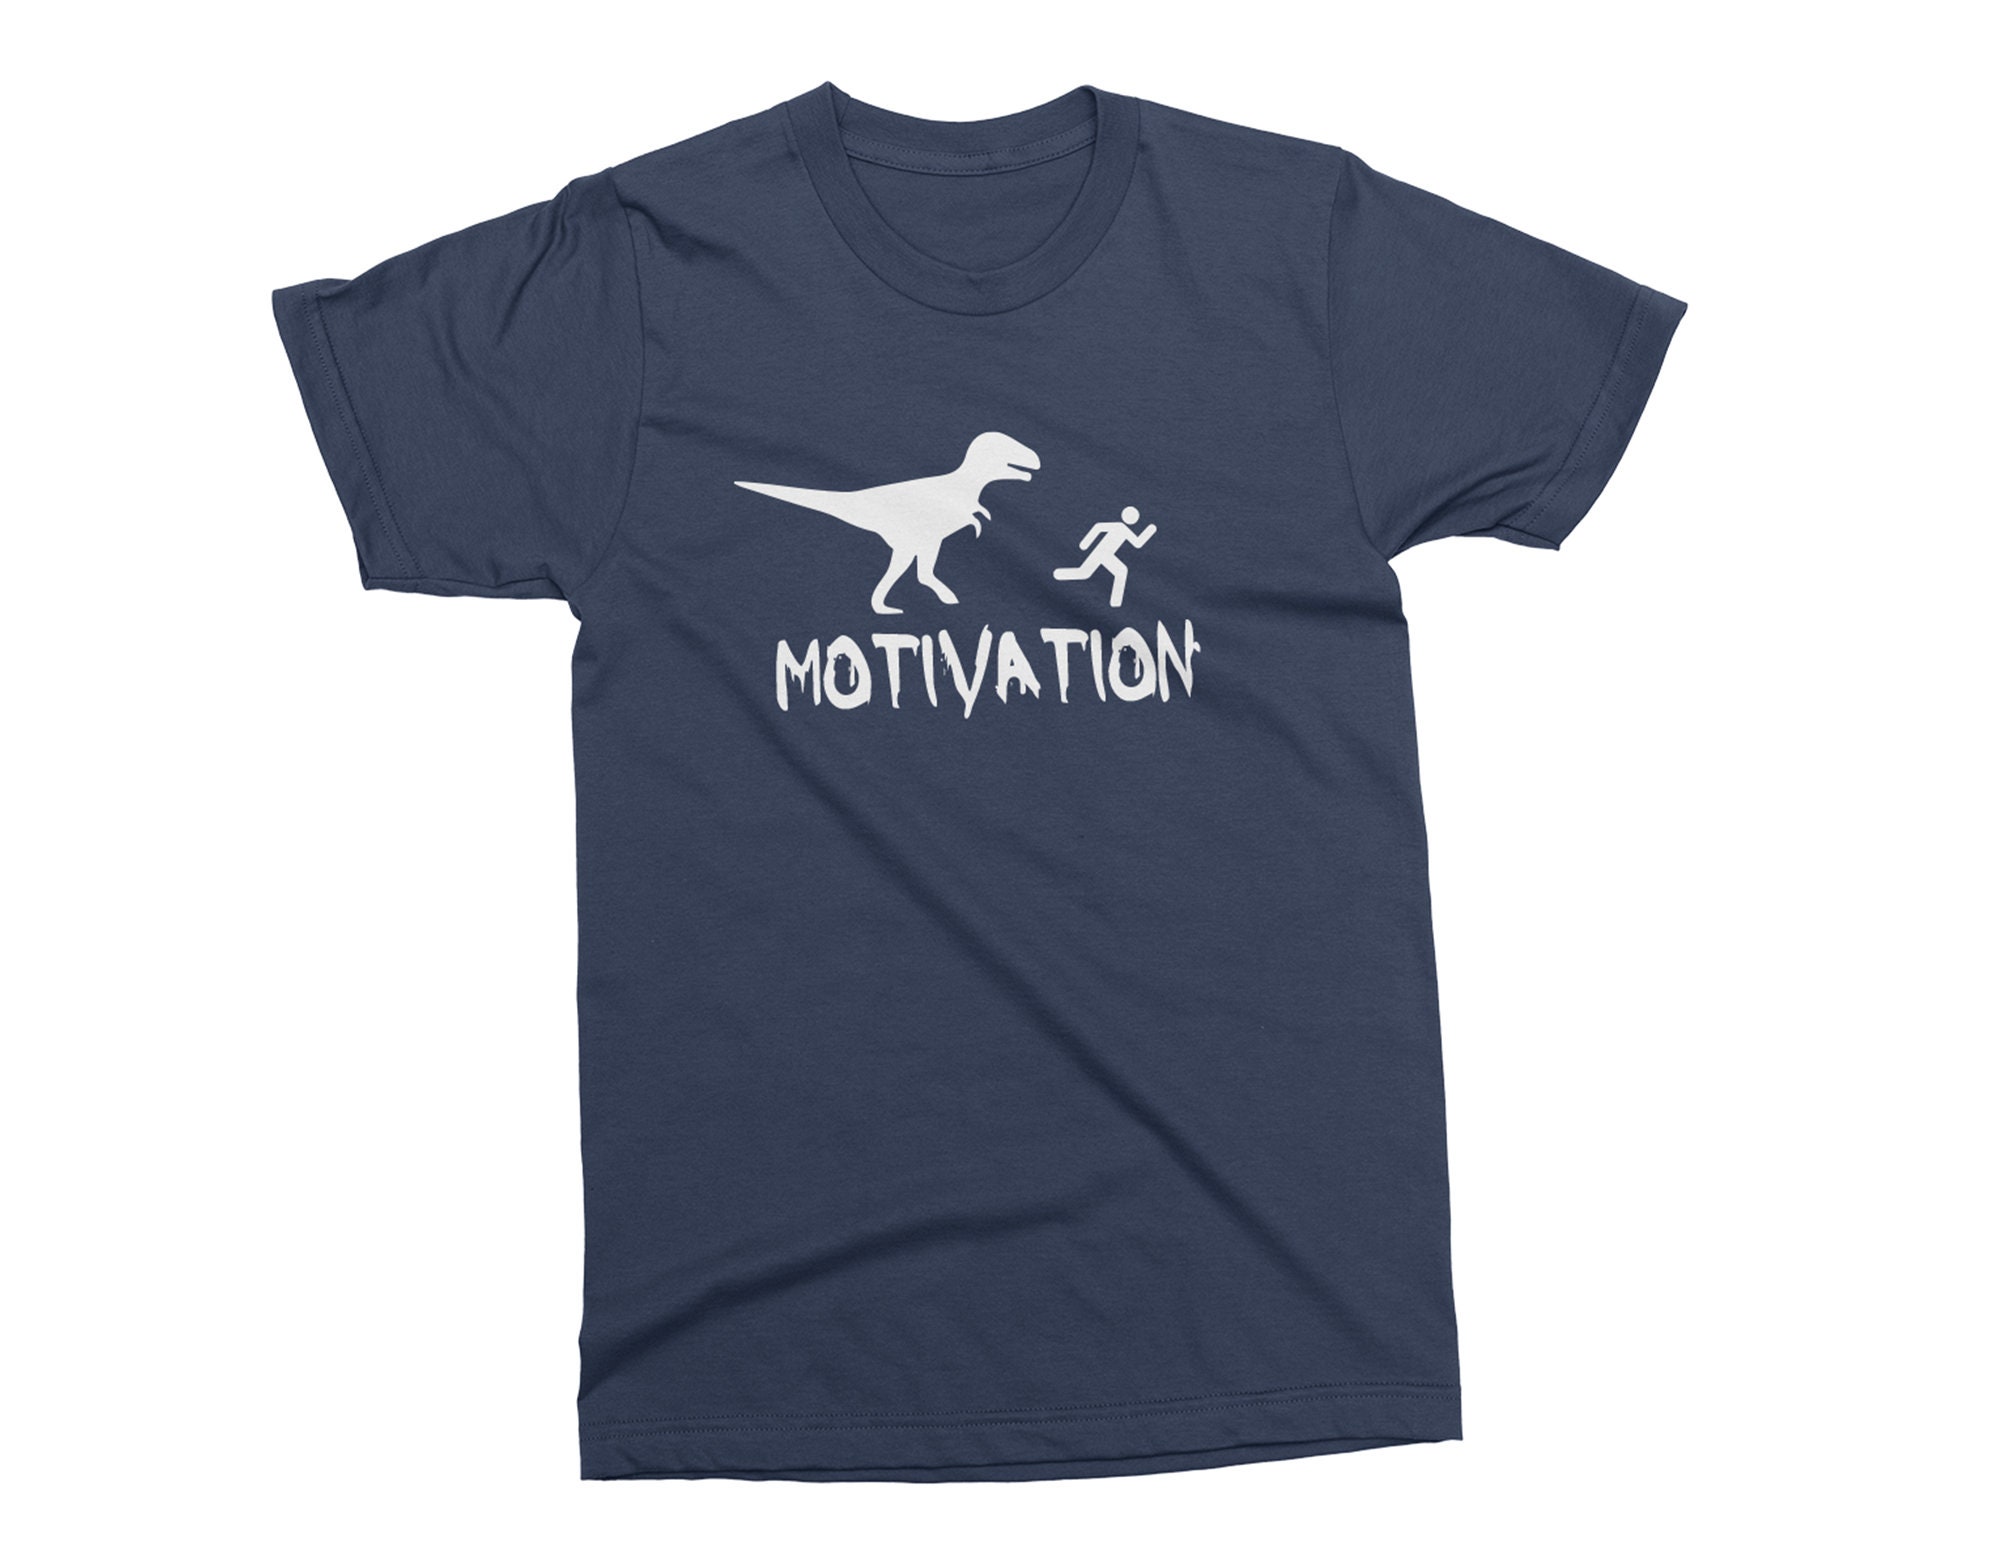 T-shirt Gift for him This is my way to get motivated MOTIVATION Kleding Gender-neutrale kleding volwassenen Tops & T-shirts T-shirts T-shirts met print Unisex Funny T-shirt Dinosaur Birthday Tee Running from a Dinosaur. 